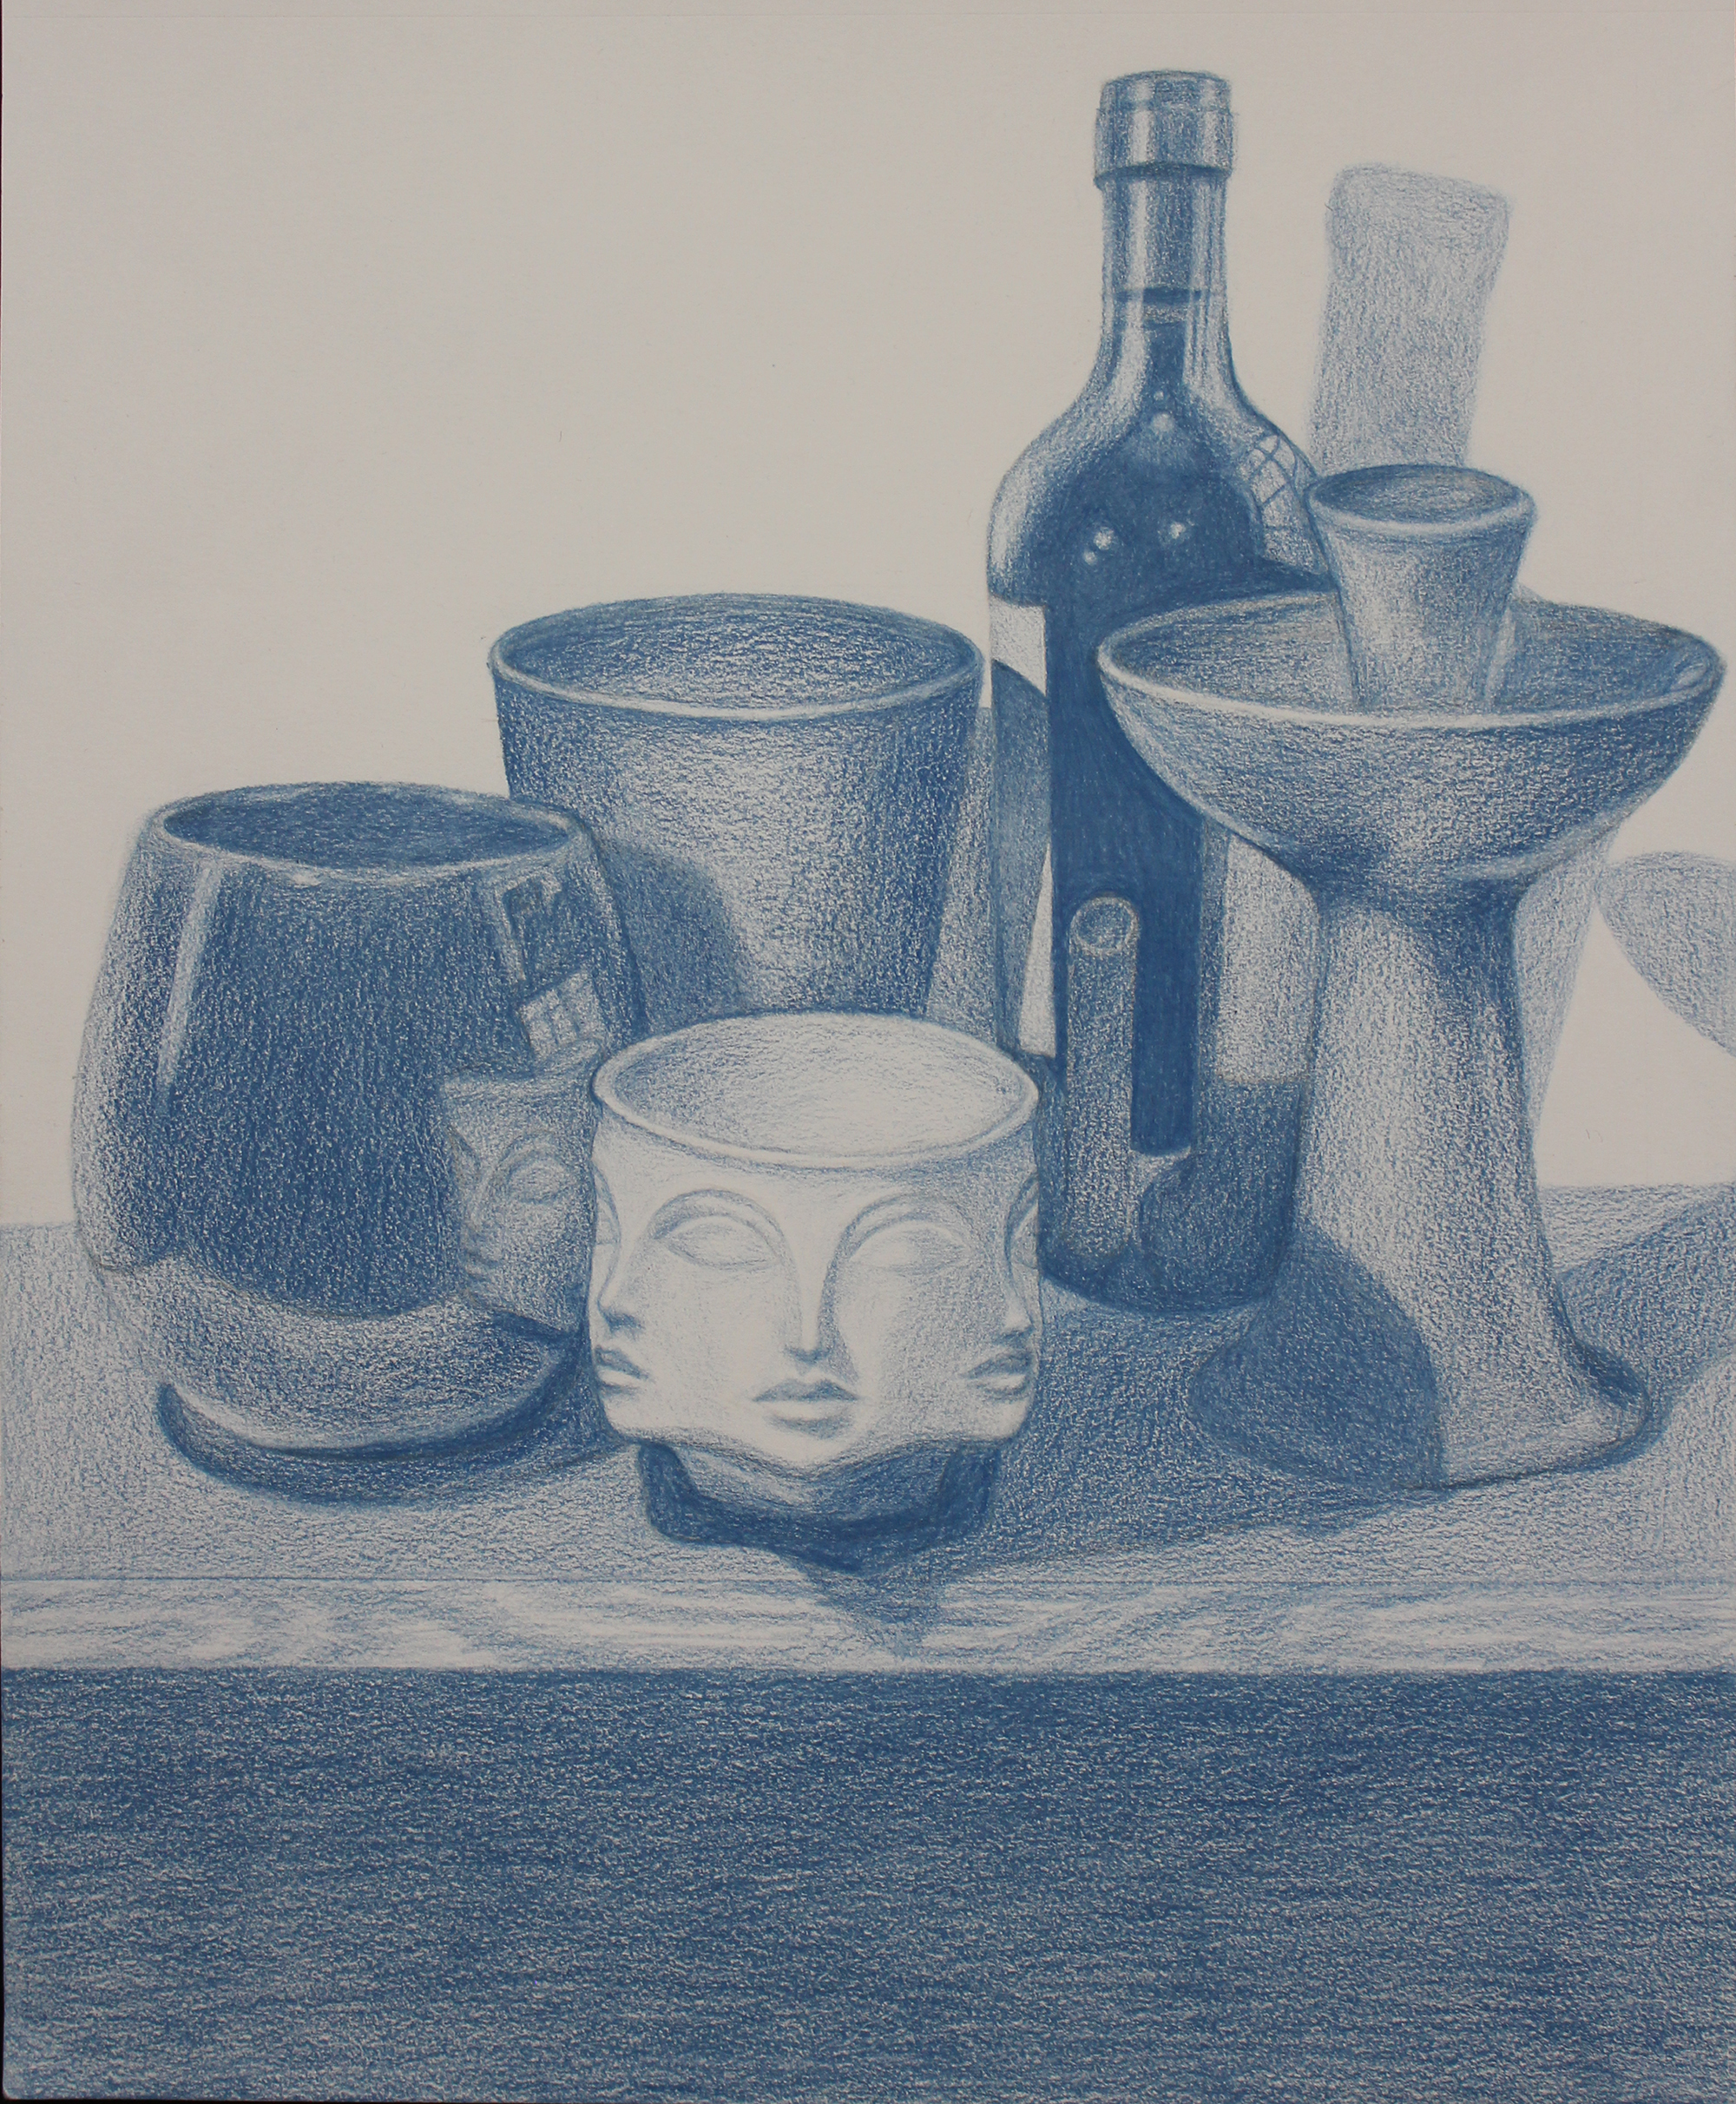 View Image Details Muse Still Life - blue pencil by Sydney